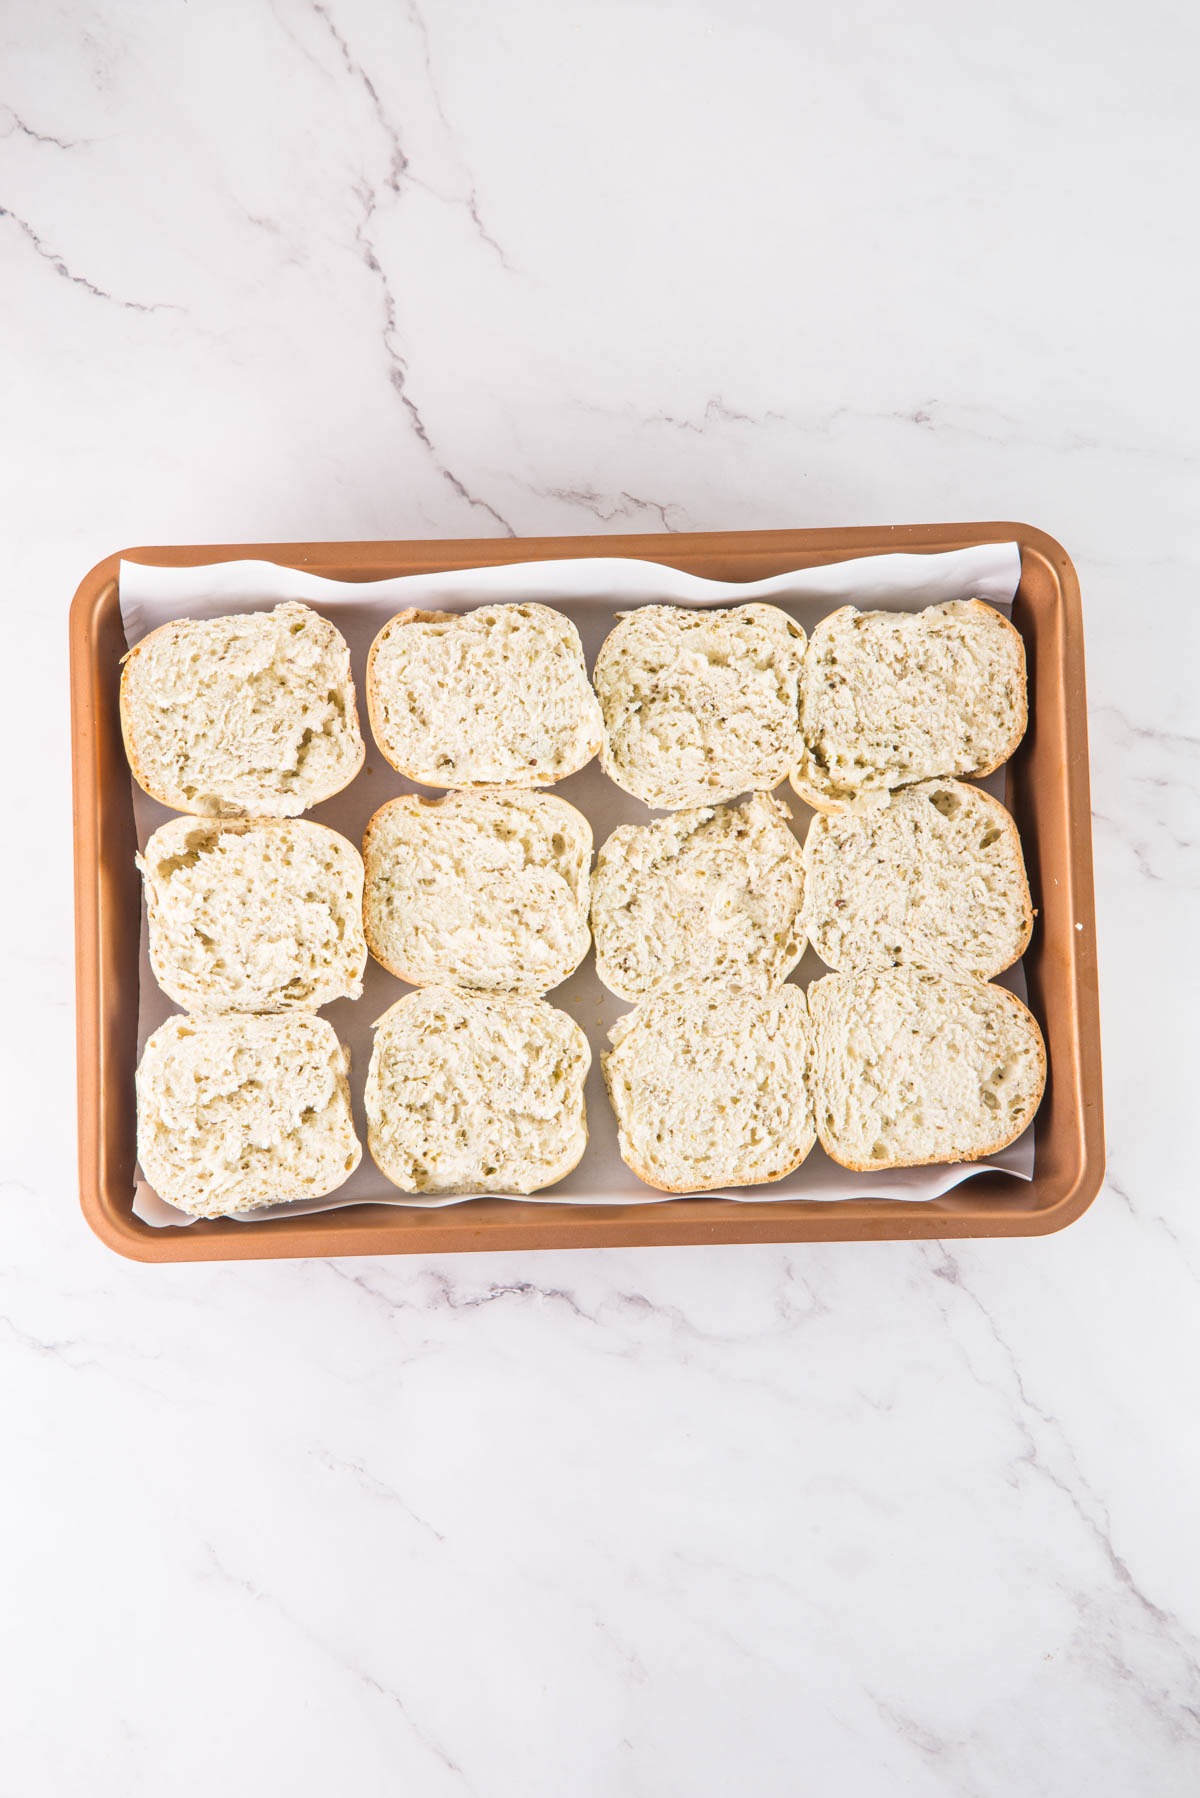 Bread rolls in a brown tray on a marble countertop.